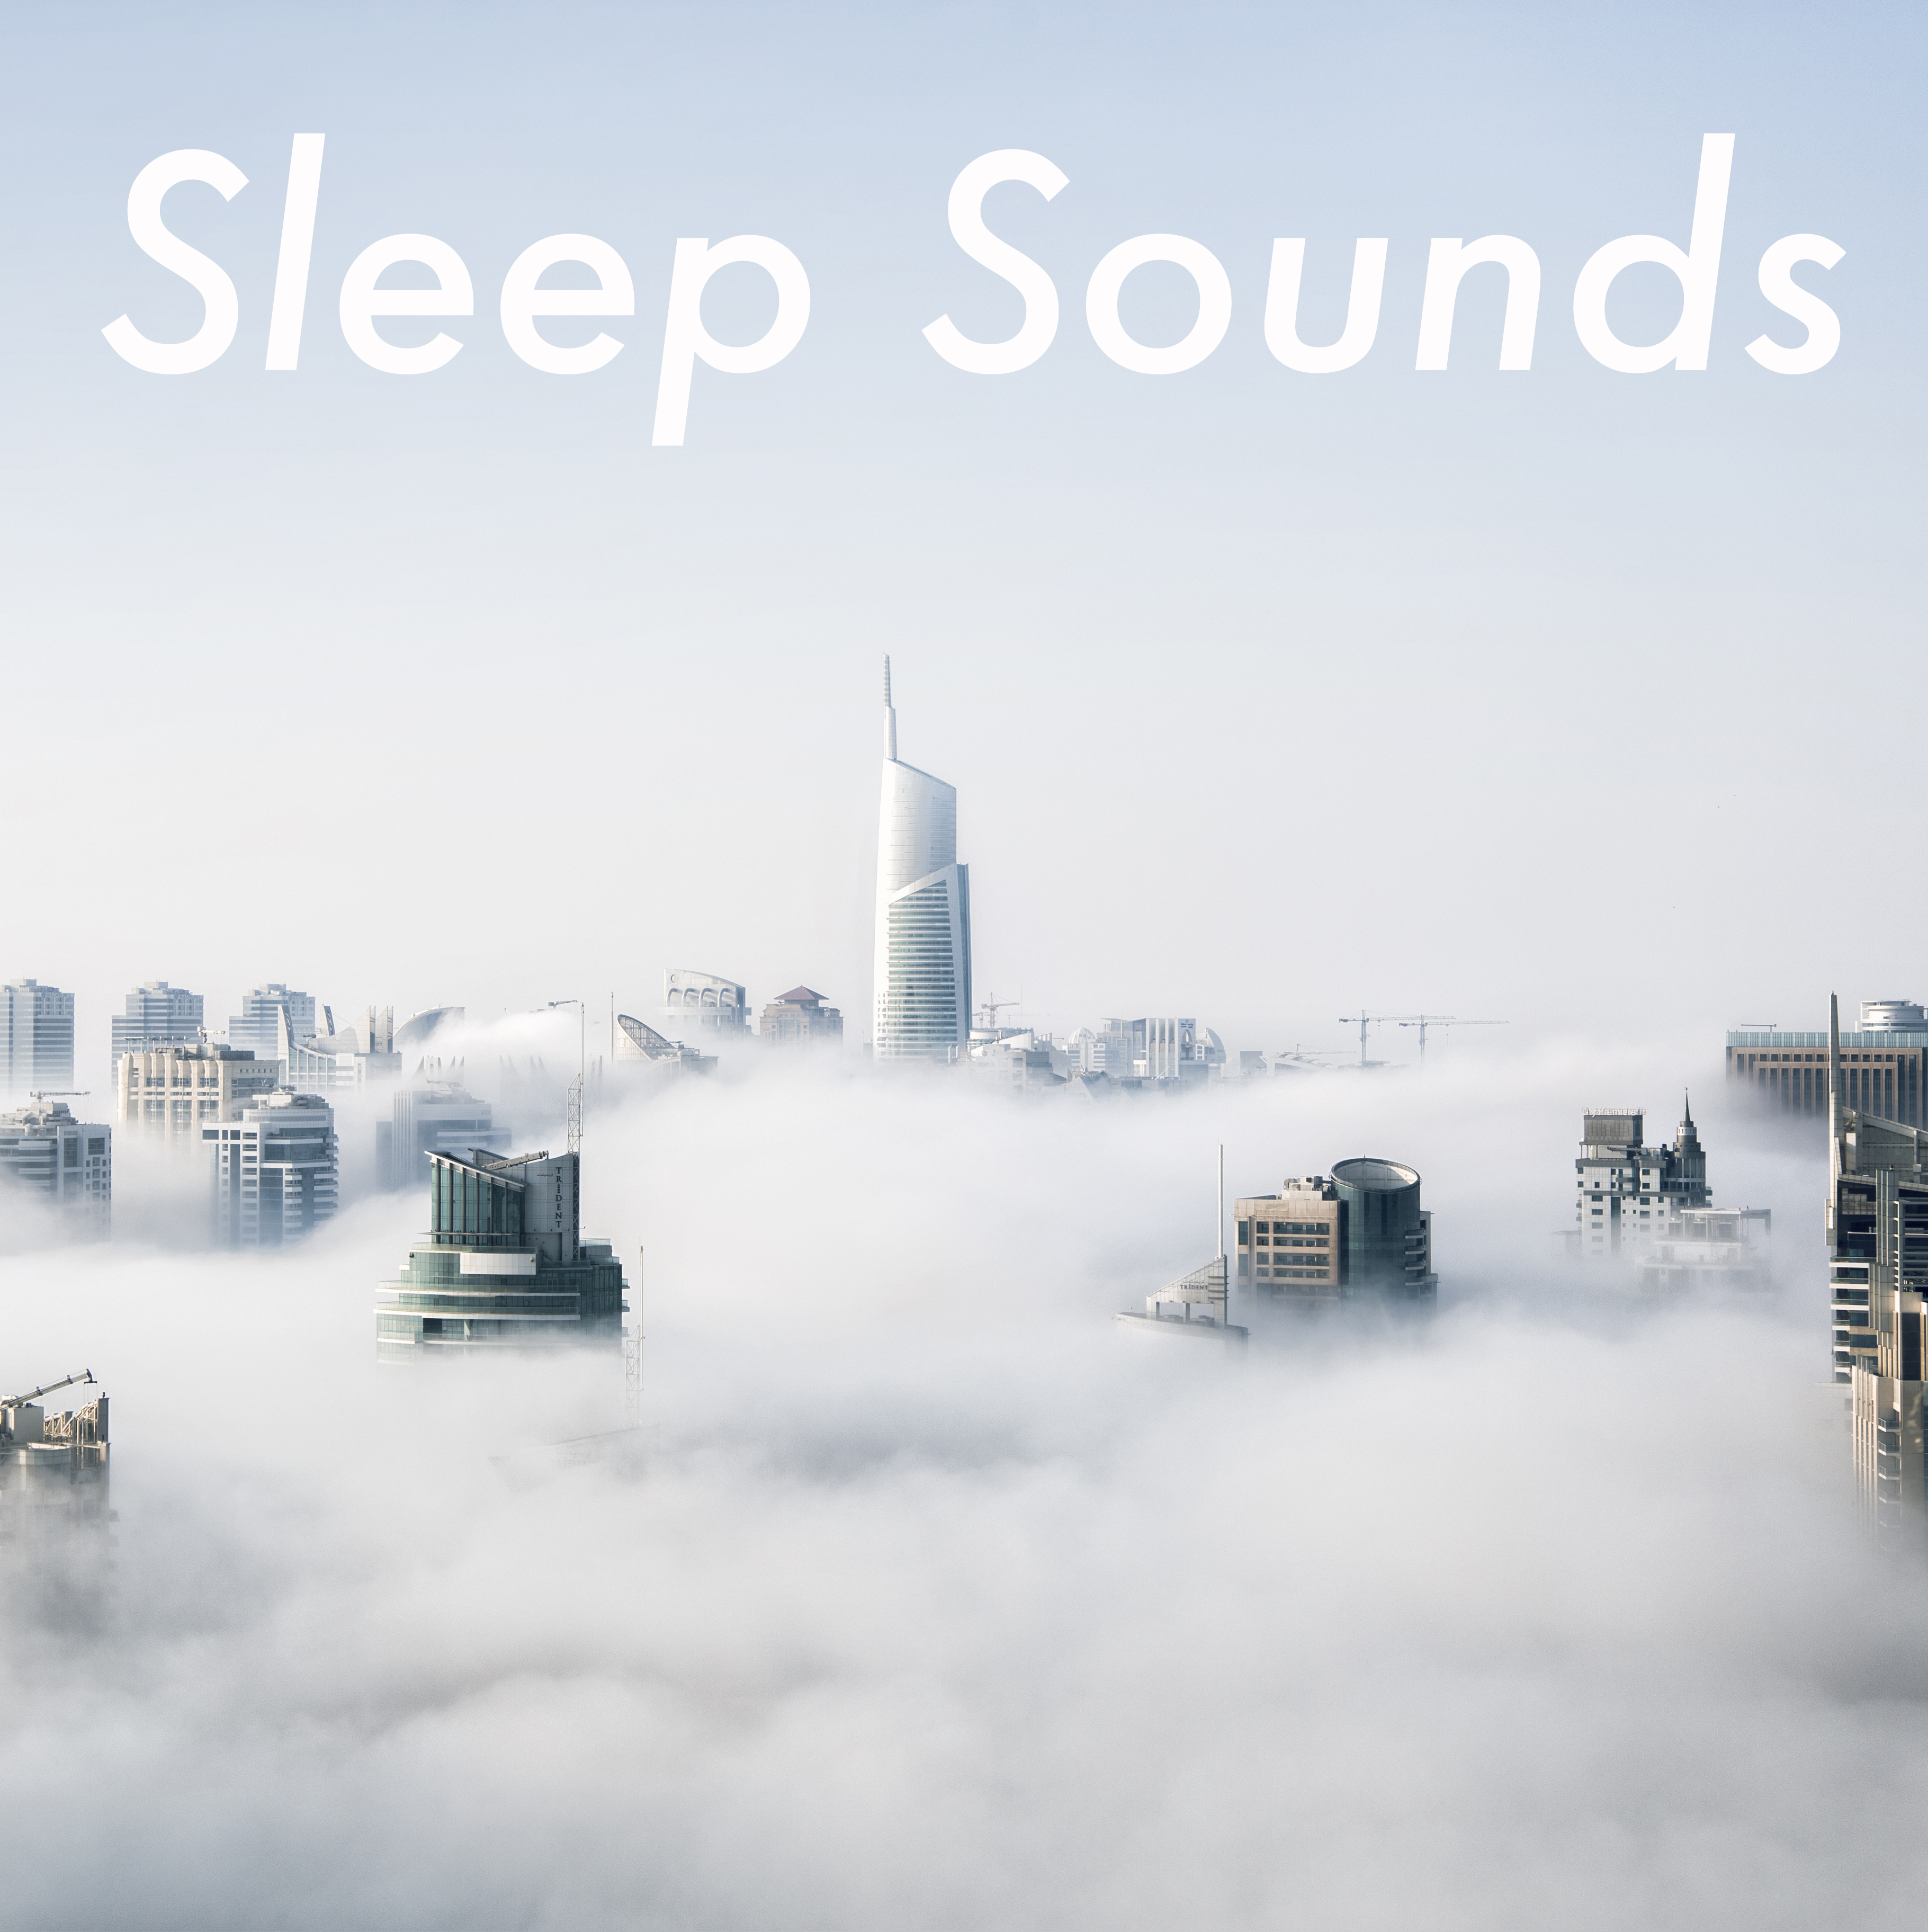 17 Sleep Sounds. Sounds of Rain Water to Help You Sleep all Night. Loopable with no Fades